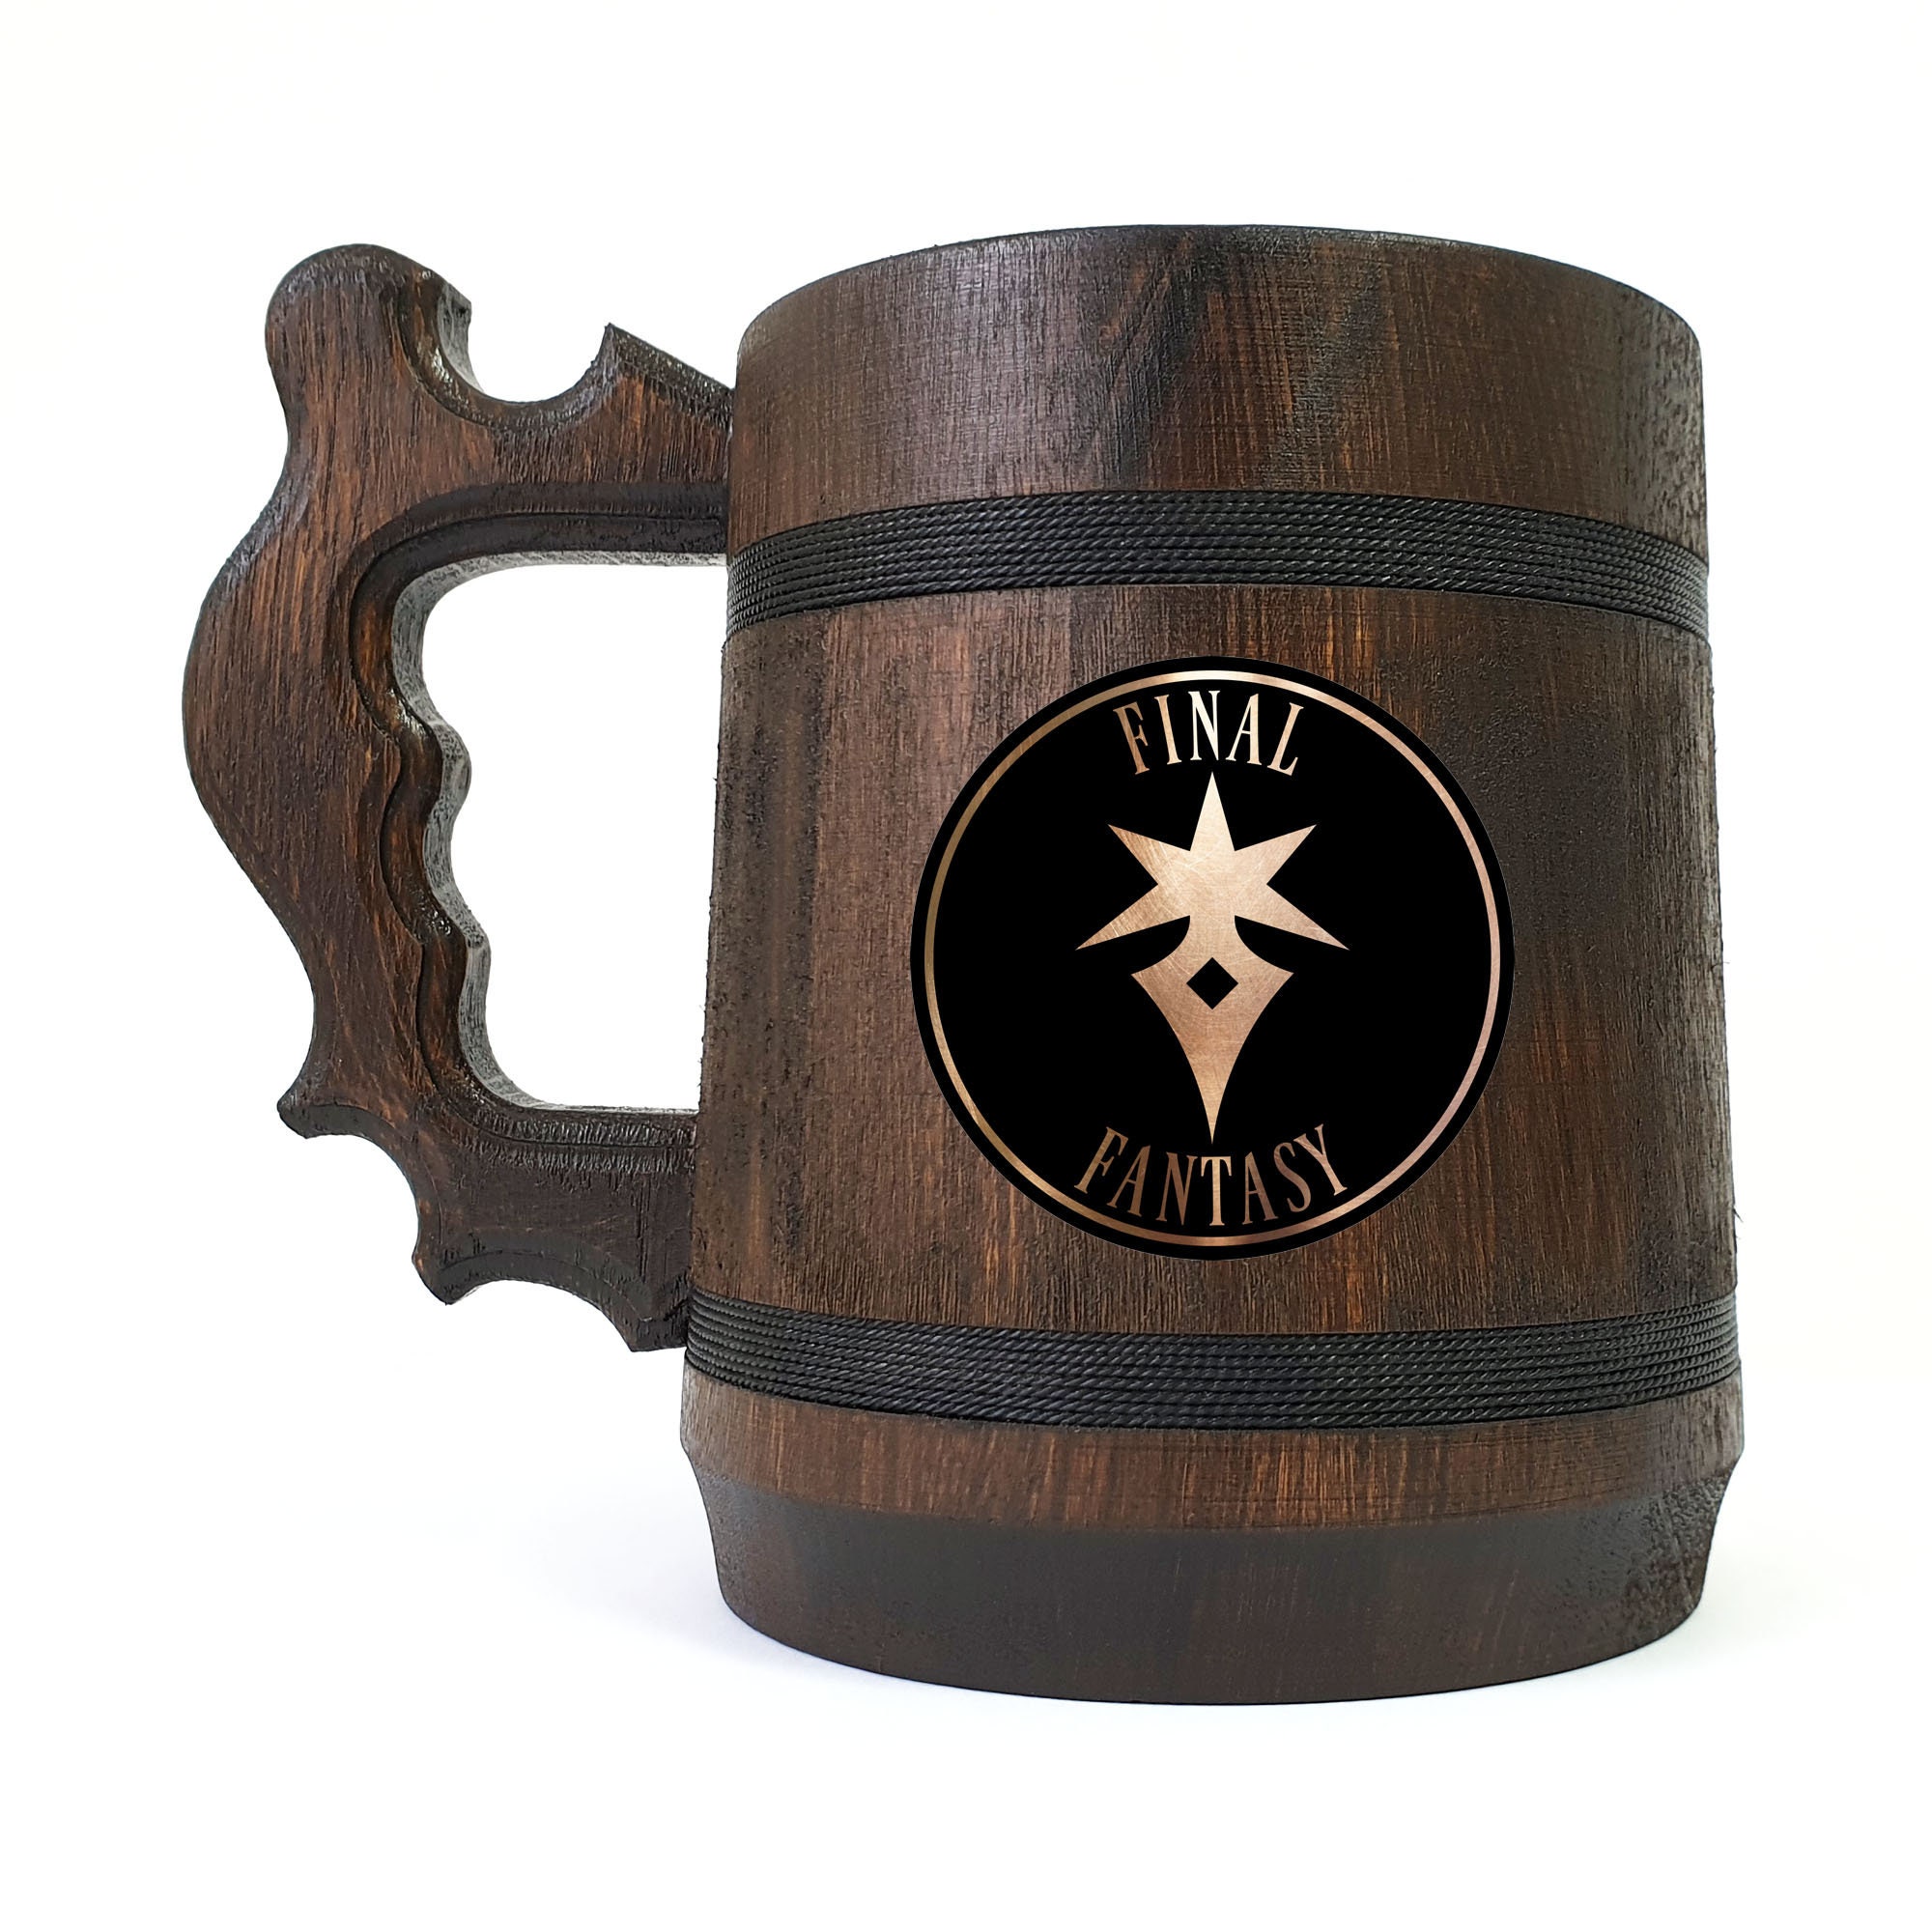 Personalized Dark Knight Mug  Final Fantasy XIV Jobs Beer Stein  Gift For Friends  Groomsman Mug  Gifts For Him  Gift Idea For Guys